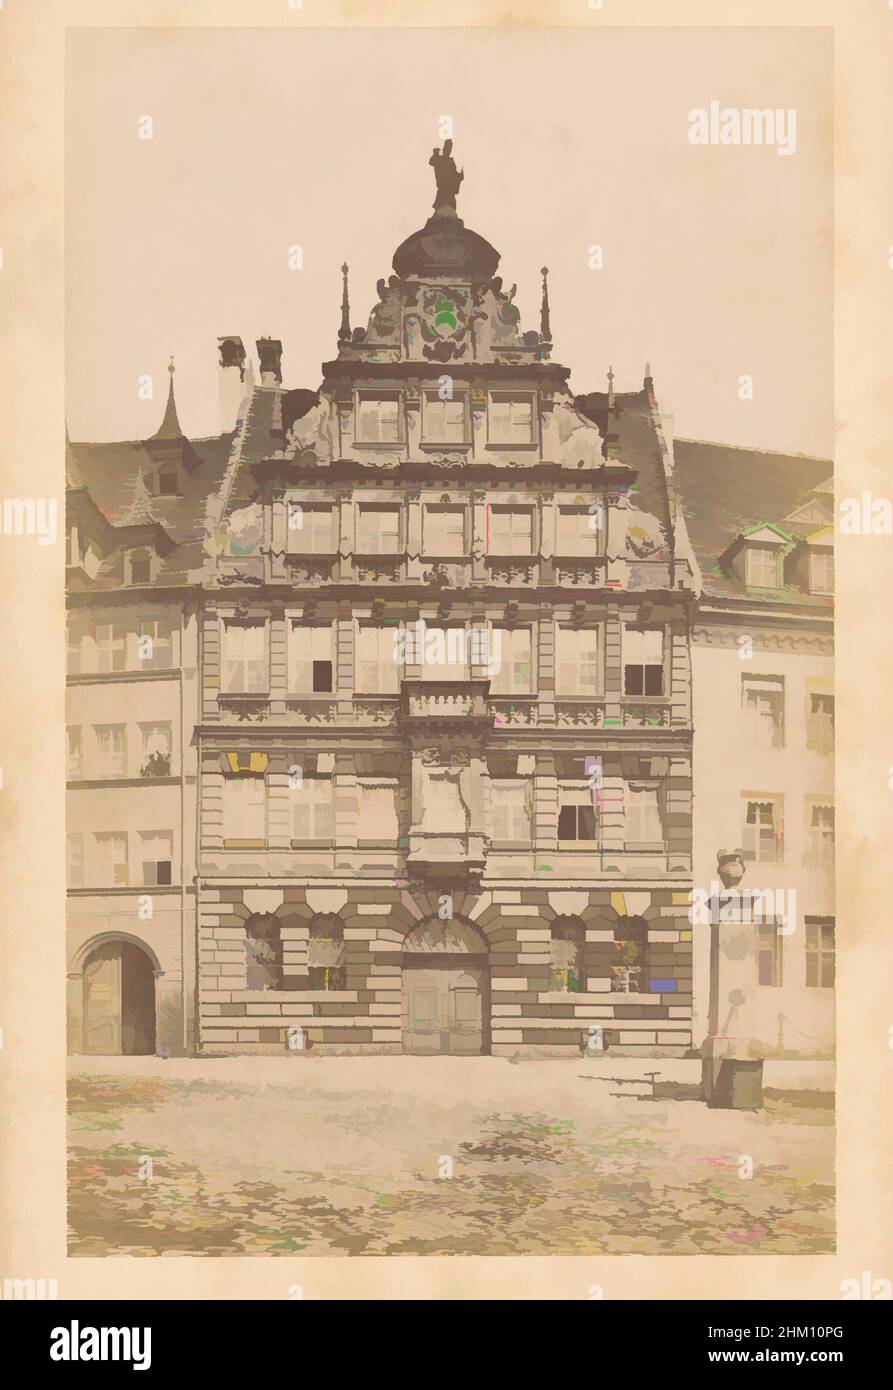 Art inspired by The Pellerhaus in Nuremberg, Pellerhaus, Nuremberg, publisher: Friedrich Bruckmann, Neurenberg, publisher: München, 1863 - 1898, cardboard, albumen print, height 171 mm × width 113 mm, Classic works modernized by Artotop with a splash of modernity. Shapes, color and value, eye-catching visual impact on art. Emotions through freedom of artworks in a contemporary way. A timeless message pursuing a wildly creative new direction. Artists turning to the digital medium and creating the Artotop NFT Stock Photo